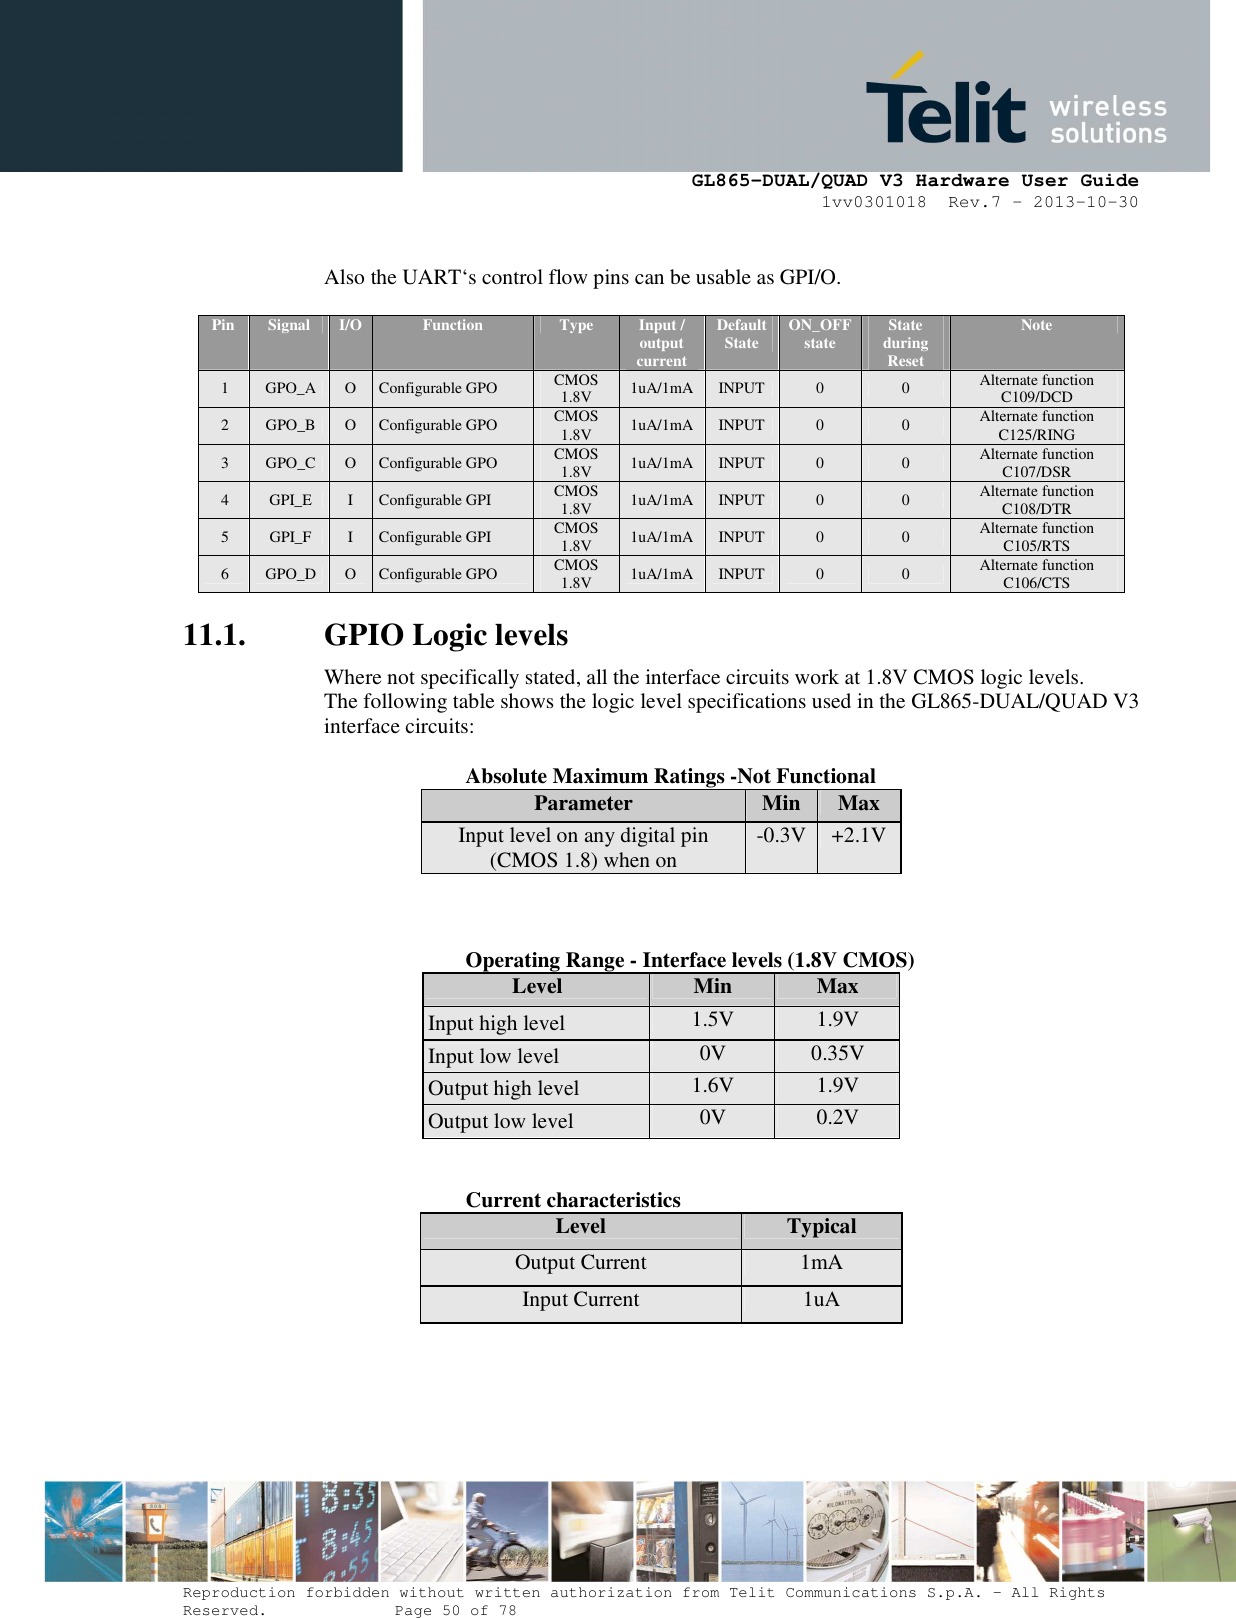      GL865-DUAL/QUAD V3 Hardware User Guide 1vv0301018  Rev.7 – 2013-10-30  Reproduction forbidden without written authorization from Telit Communications S.p.A. - All Rights Reserved.    Page 50 of 78 Mod. 0805 2011-07 Rev.2  Also the UART‘s control flow pins can be usable as GPI/O.  Pin   Signal  I/O  Function  Type  Input / output current Default State  ON_OFF state  State during Reset Note 1  GPO_A  O  Configurable GPO  CMOS 1.8V  1uA/1mA  INPUT  0  0  Alternate function C109/DCD 2  GPO_B  O  Configurable GPO  CMOS 1.8V  1uA/1mA  INPUT  0  0  Alternate function  C125/RING 3  GPO_C  O  Configurable GPO  CMOS 1.8V  1uA/1mA  INPUT  0  0  Alternate function  C107/DSR 4  GPI_E  I  Configurable GPI  CMOS 1.8V  1uA/1mA  INPUT  0  0  Alternate function  C108/DTR 5  GPI_F  I  Configurable GPI  CMOS 1.8V  1uA/1mA  INPUT  0  0  Alternate function C105/RTS 6  GPO_D  O  Configurable GPO  CMOS 1.8V  1uA/1mA  INPUT  0  0  Alternate function C106/CTS 11.1. GPIO Logic levels  Where not specifically stated, all the interface circuits work at 1.8V CMOS logic levels. The following table shows the logic level specifications used in the GL865-DUAL/QUAD V3 interface circuits:      Absolute Maximum Ratings -Not Functional Parameter  Min  Max Input level on any digital pin (CMOS 1.8) when on  -0.3V +2.1V     Operating Range - Interface levels (1.8V CMOS) Level  Min  Max Input high level  1.5V  1.9V Input low level  0V  0.35V Output high level  1.6V  1.9V Output low level  0V  0.2V      Current characteristics Level  Typical Output Current  1mA Input Current  1uA    